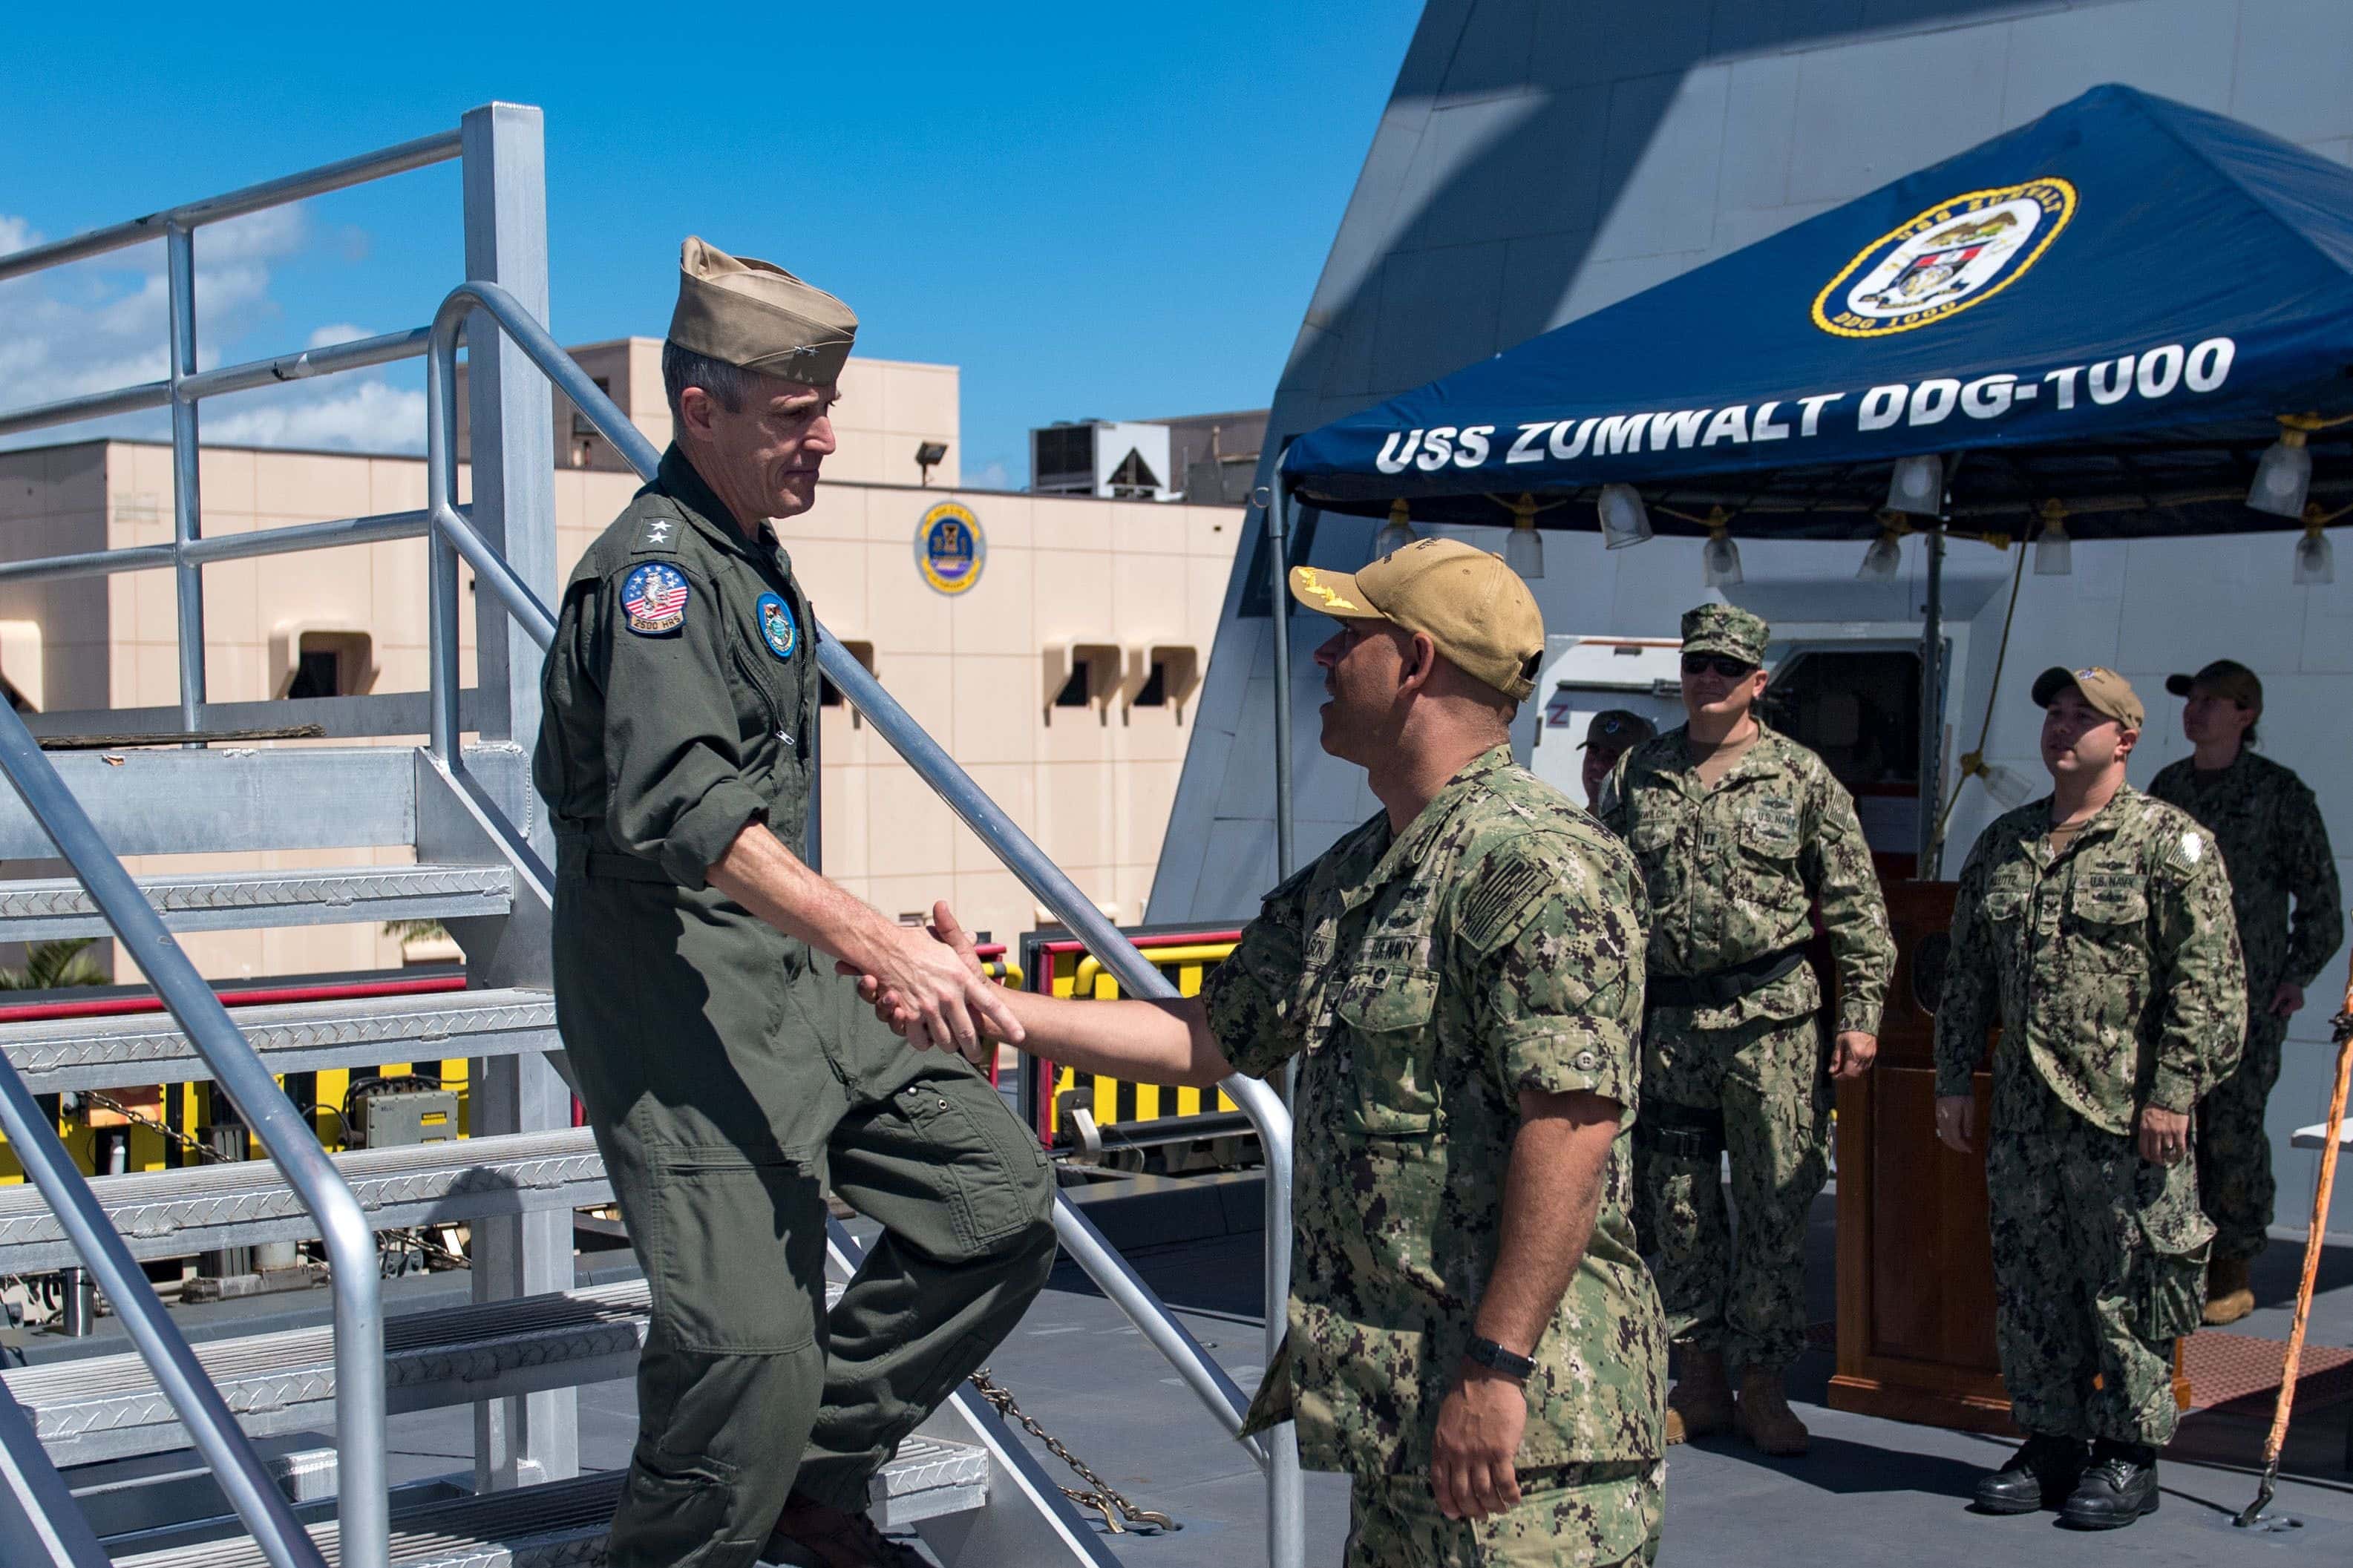 190406-N-DA737-0052 PEARL HARBOR, Hawaii (Apr. 6, 2019) Capt. Andrew Carlson, commanding officer of guided-missile destroyer USS Zumwalt (DDG 1000), shakes hands with Rear Adm.